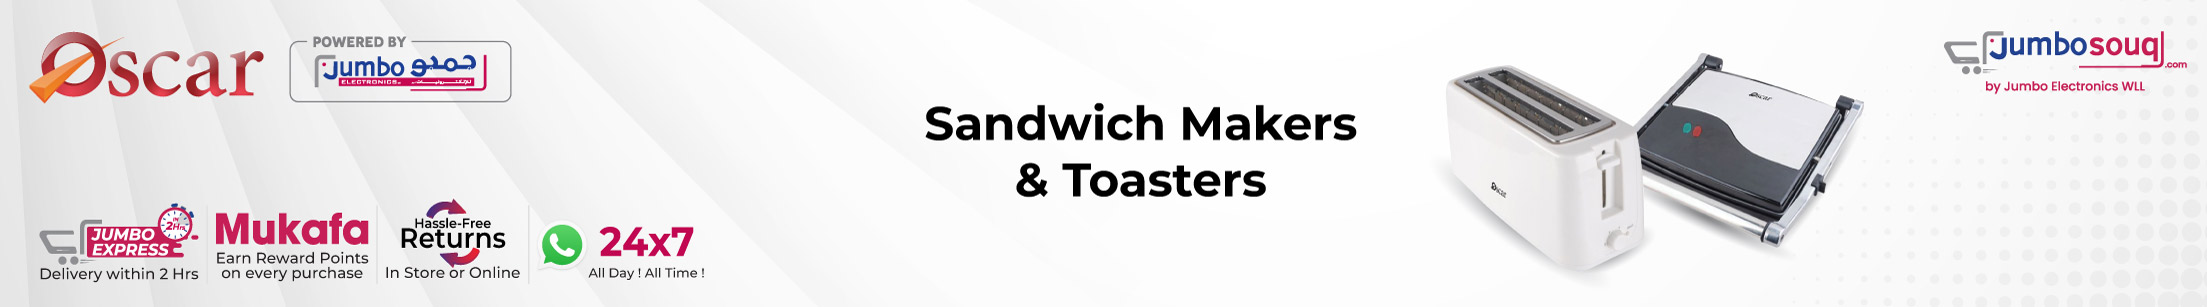 Sandwich Makers & Toasters